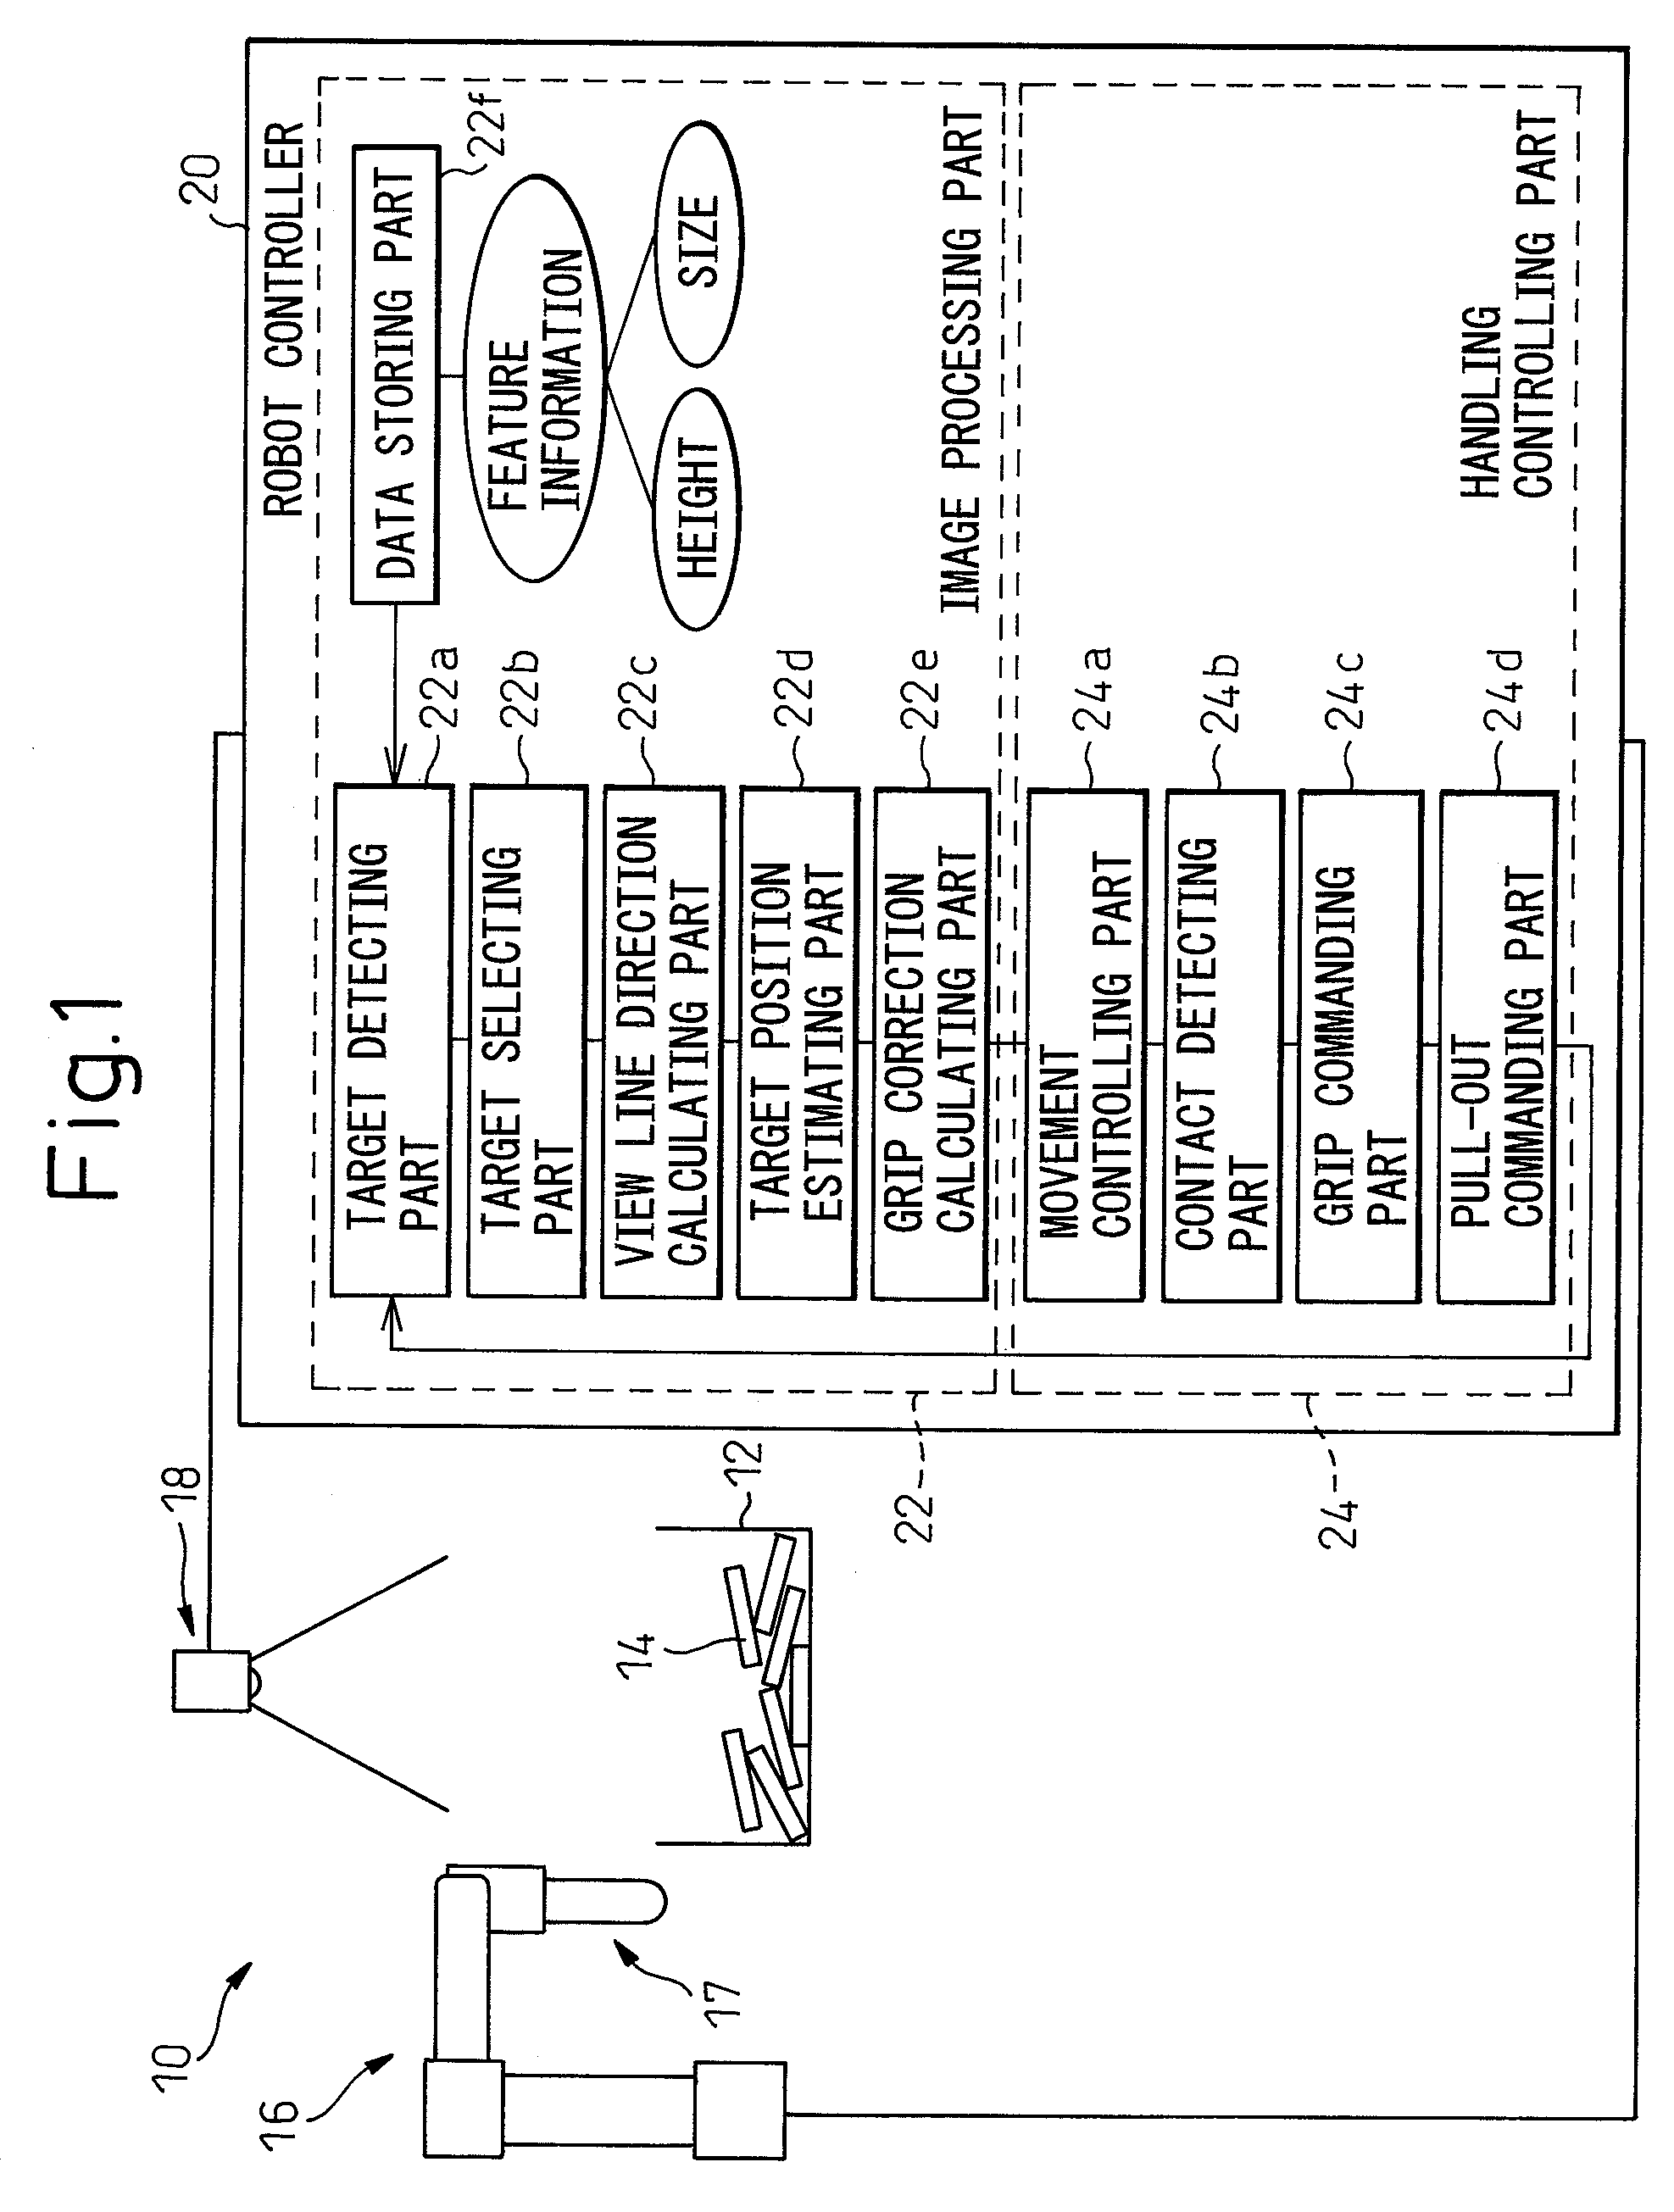 Object picking device